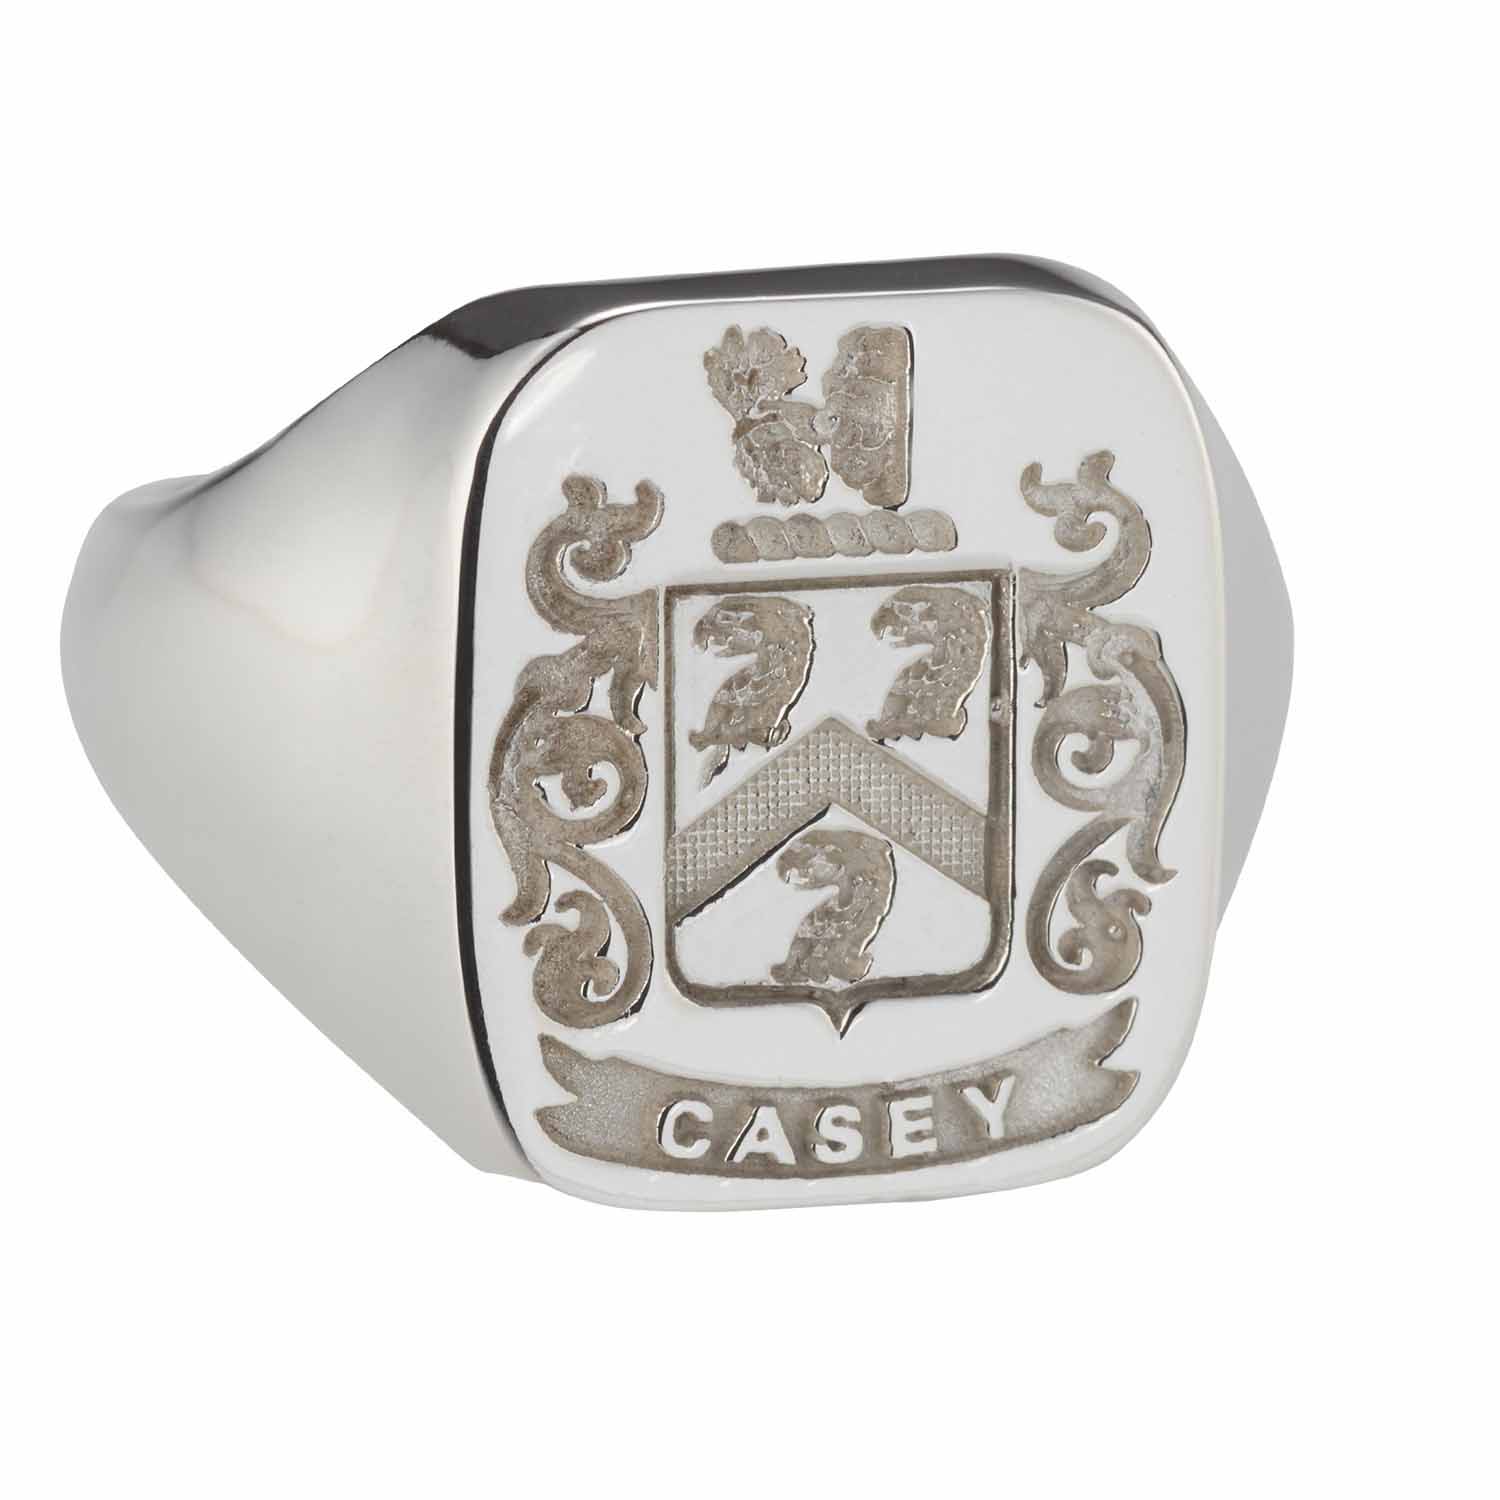 Product image for Irish Rings - Sterling Silver Personalized Coat of Arms Cushion Shaped Ring